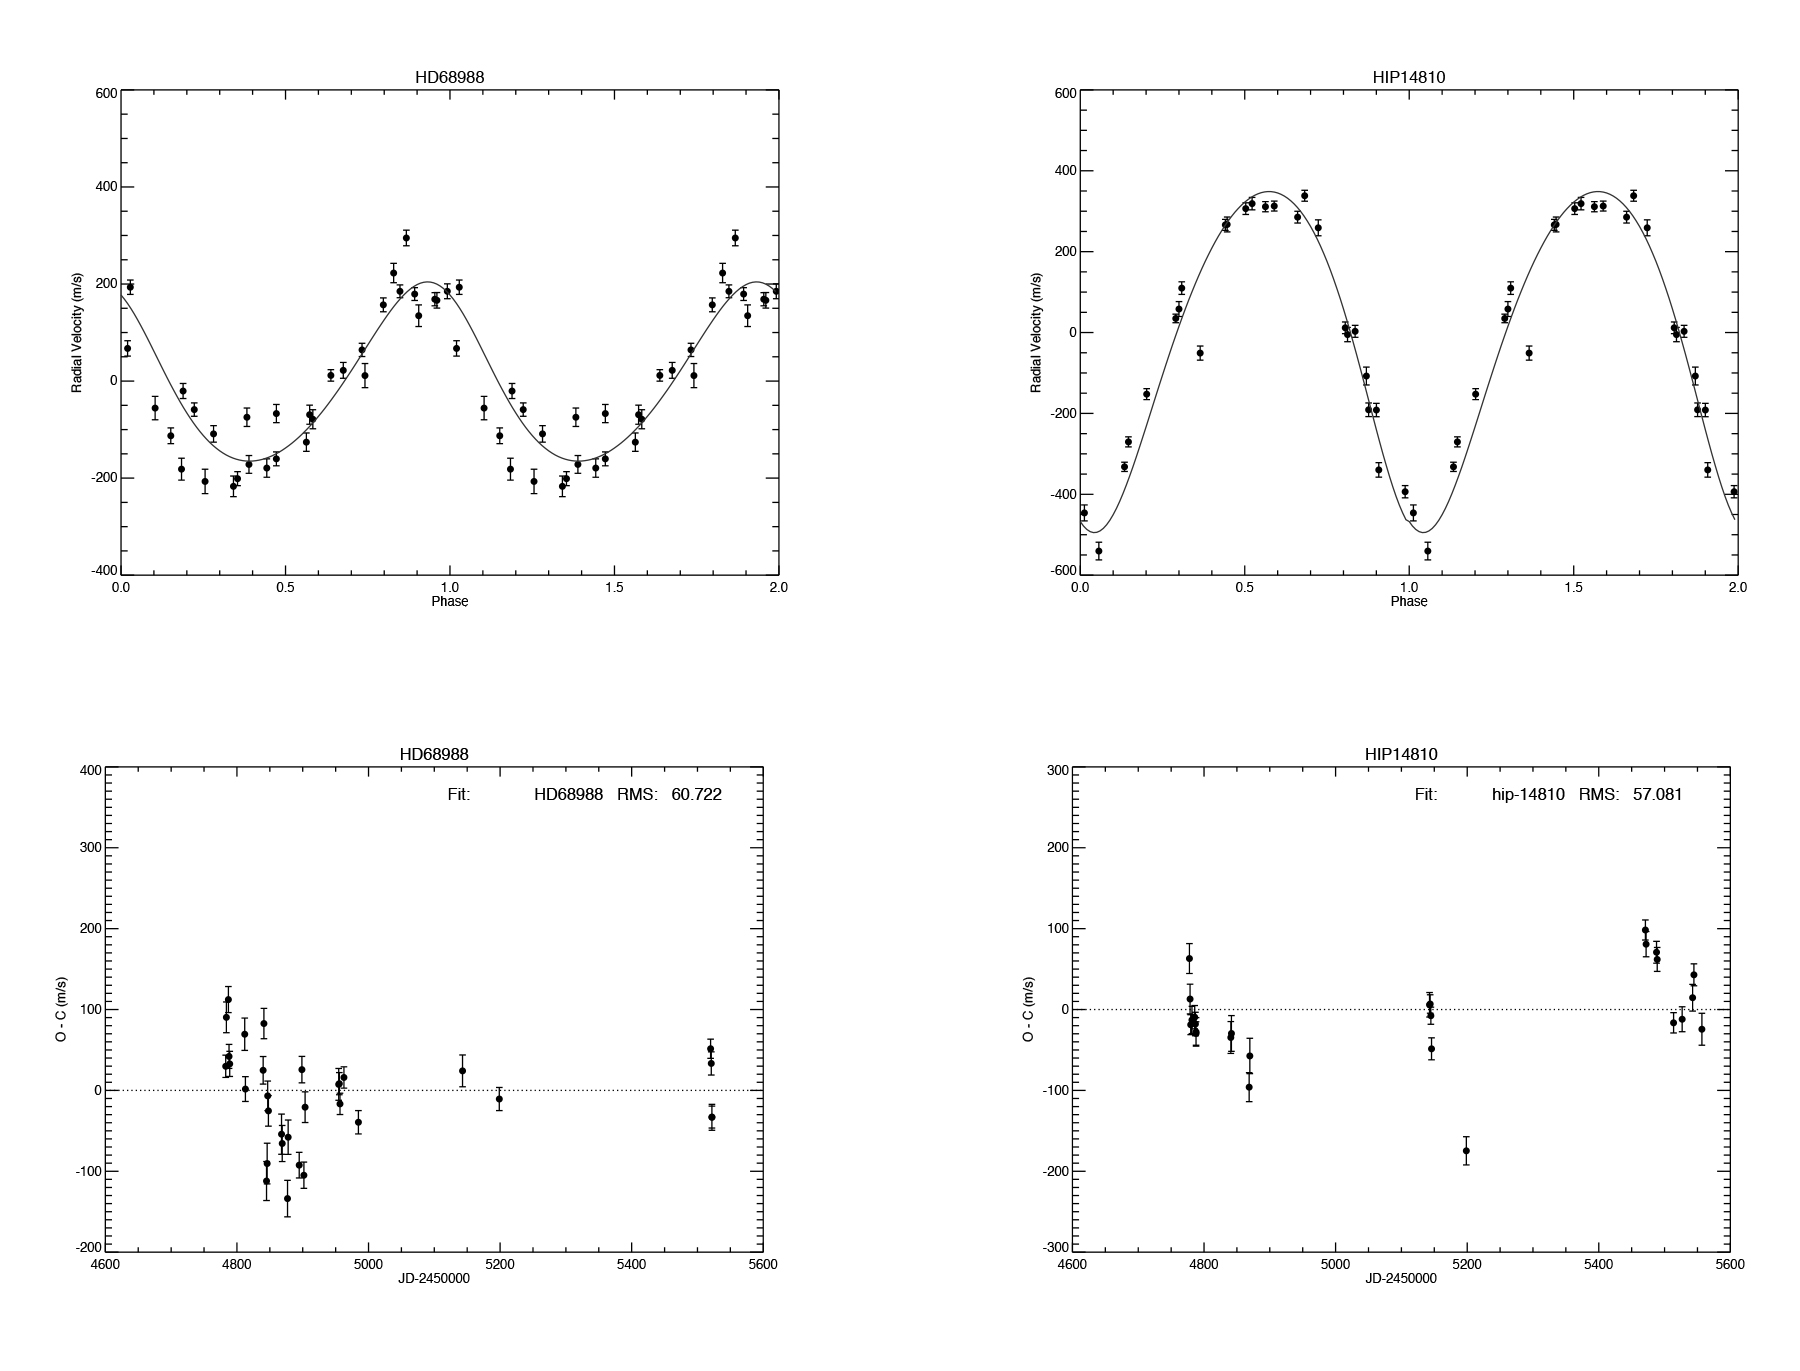 MARVELS RV data for binary stars with model fits